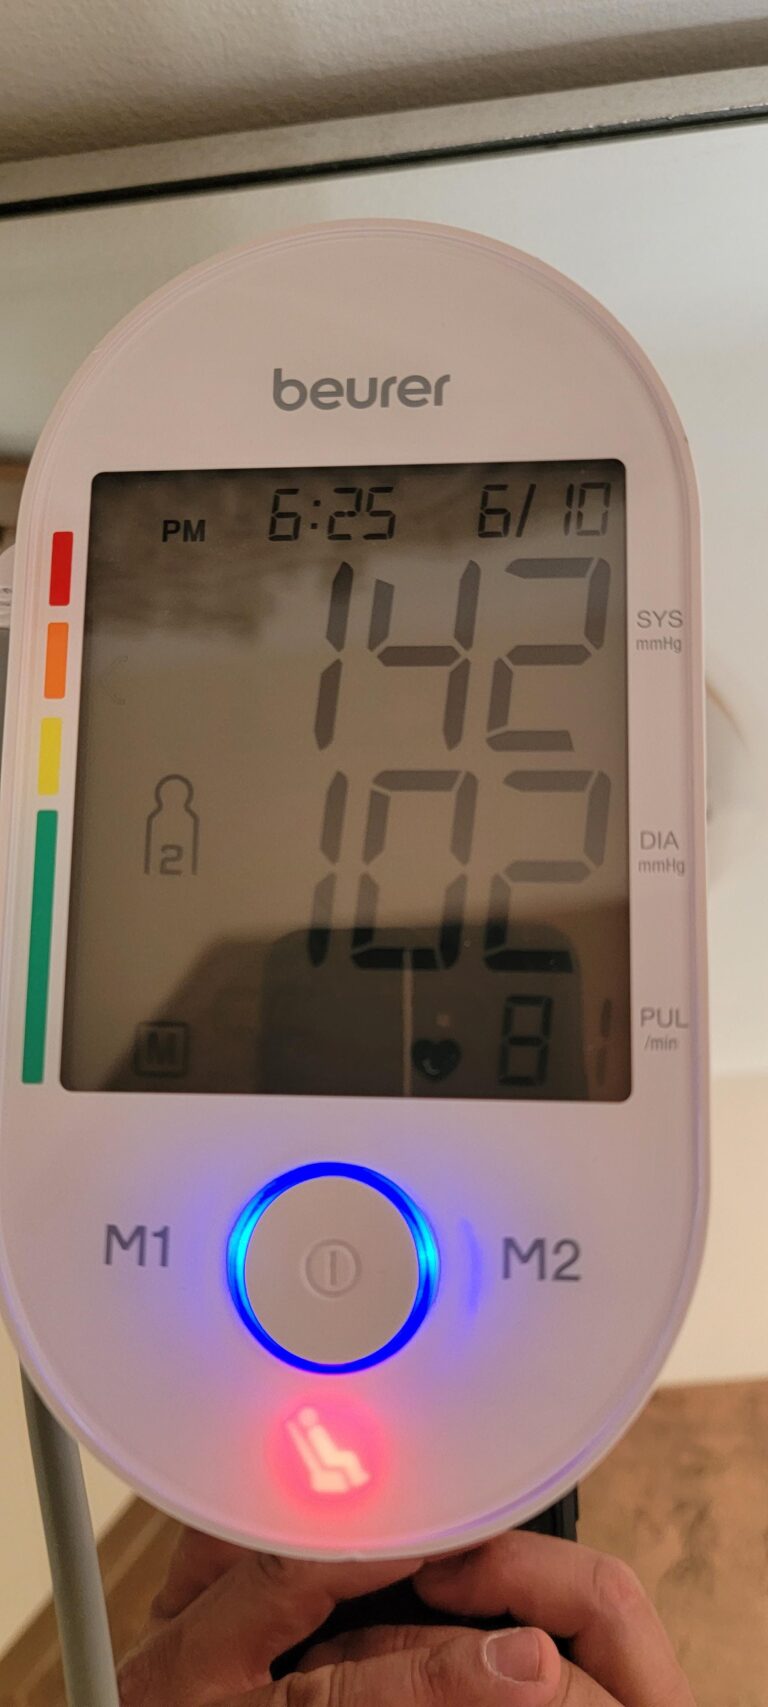 Beurer Blood Pressure Monitor Not Working: Troubleshooting Tips